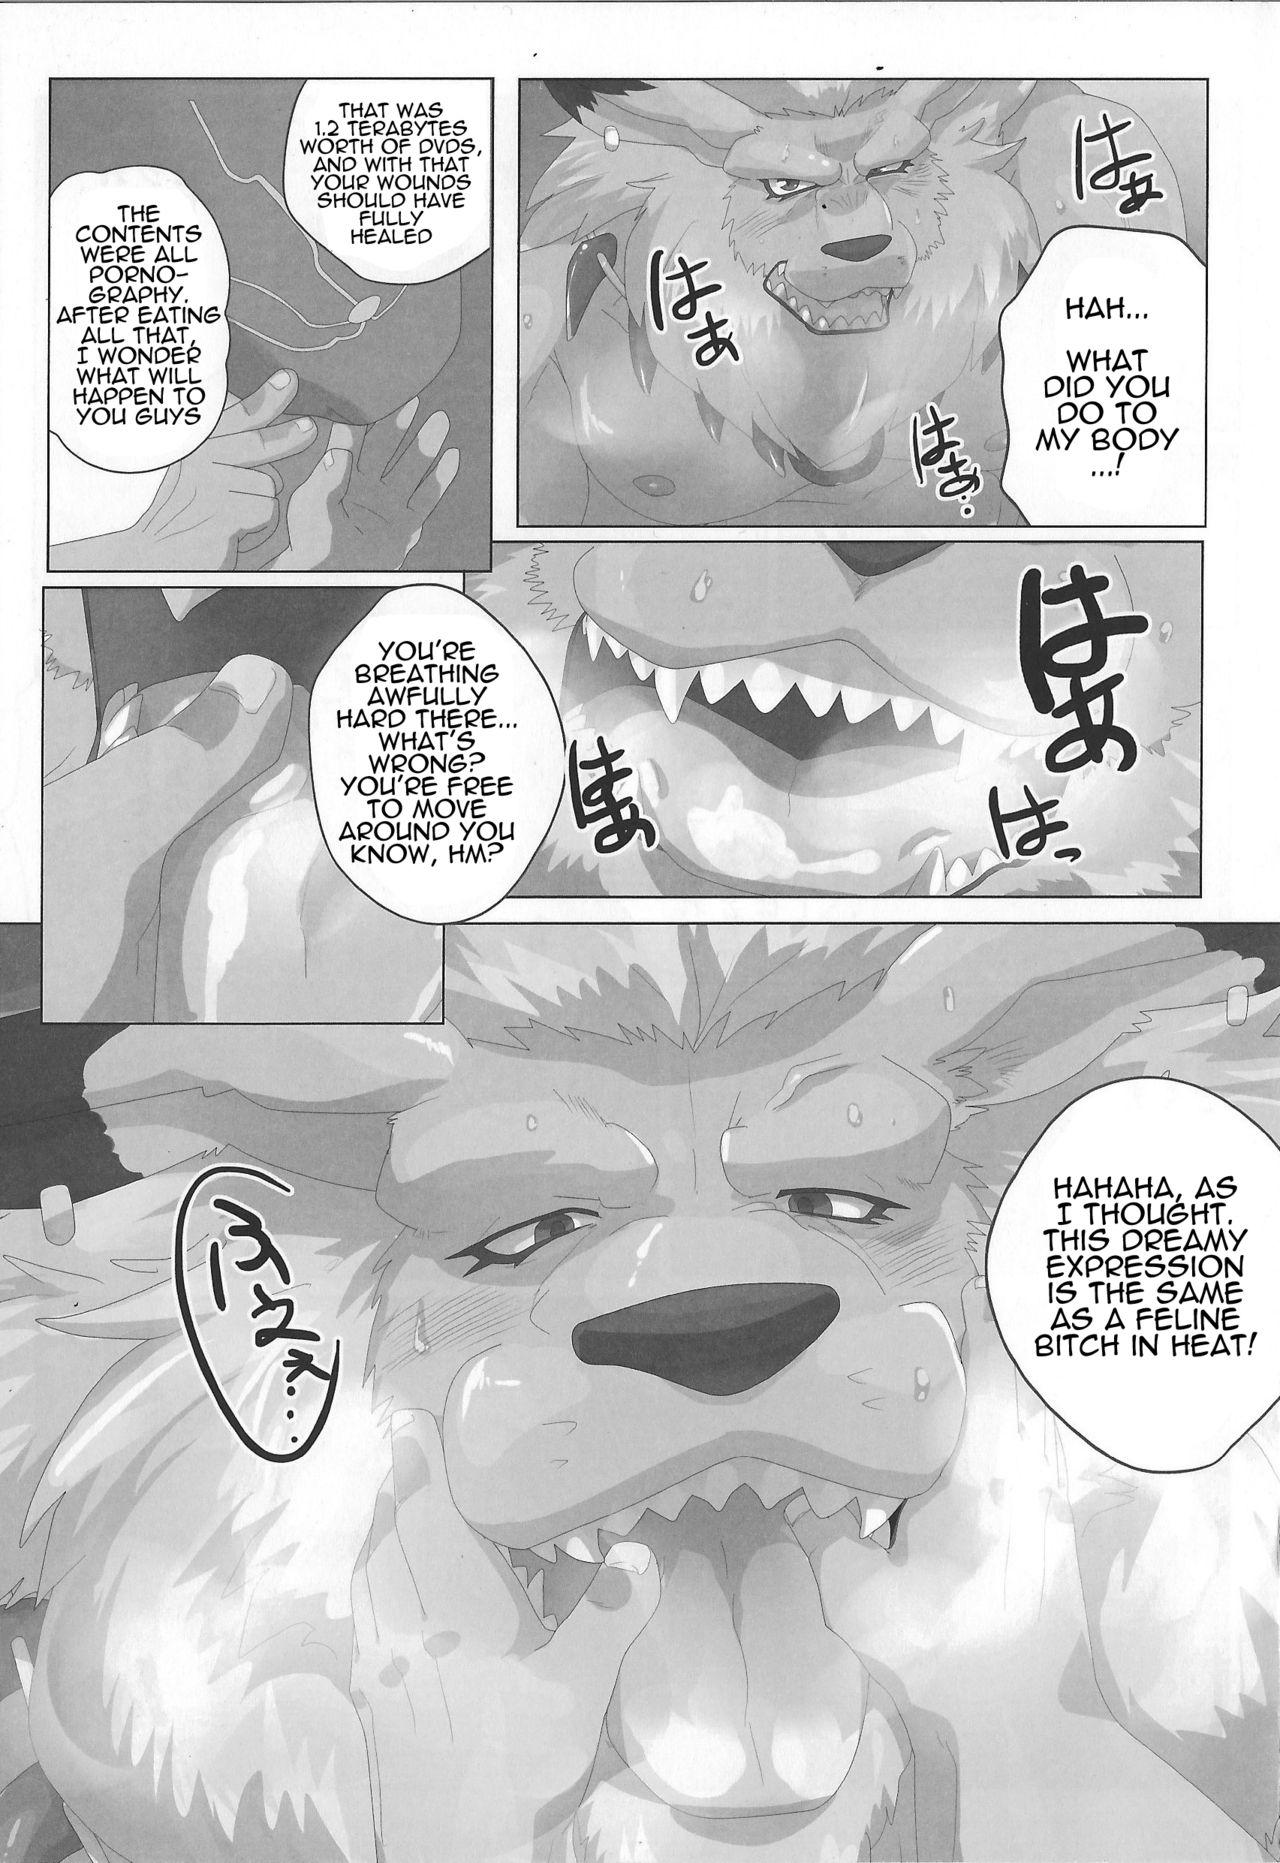 Hot Girls Getting Fucked [Debirobu] For the Lion-Man Type Electric Life Form to Overturn Fate - Leomon Doujin [ENG] - Digimon Ass To Mouth - Page 9